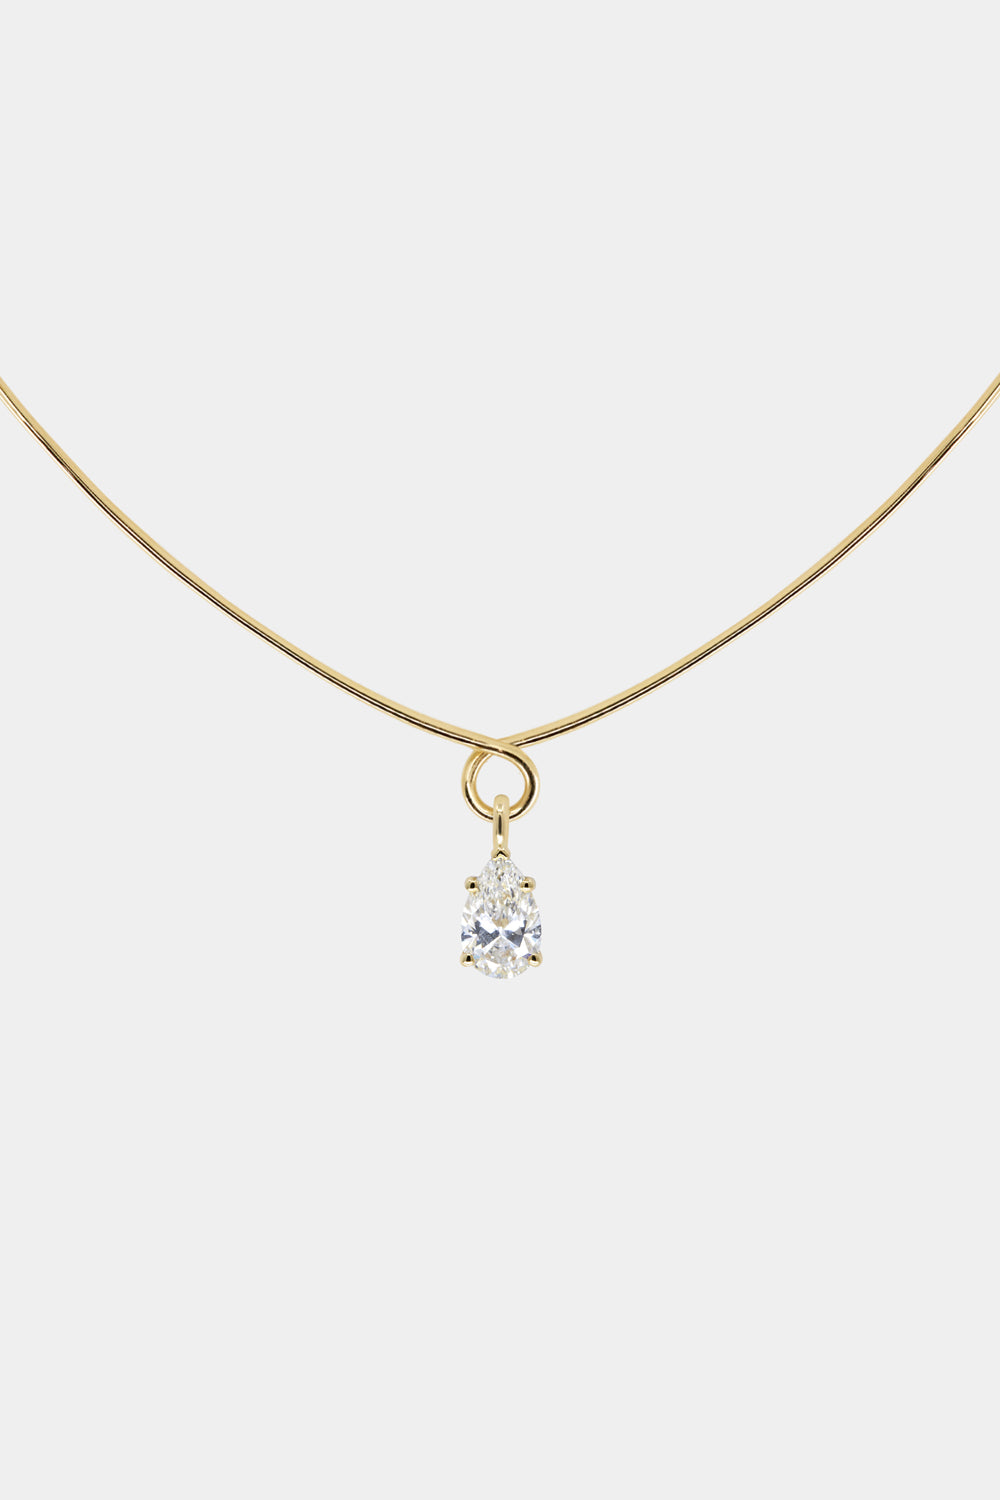 Omega Loop Necklace with Diamond | 18K Yellow Gold